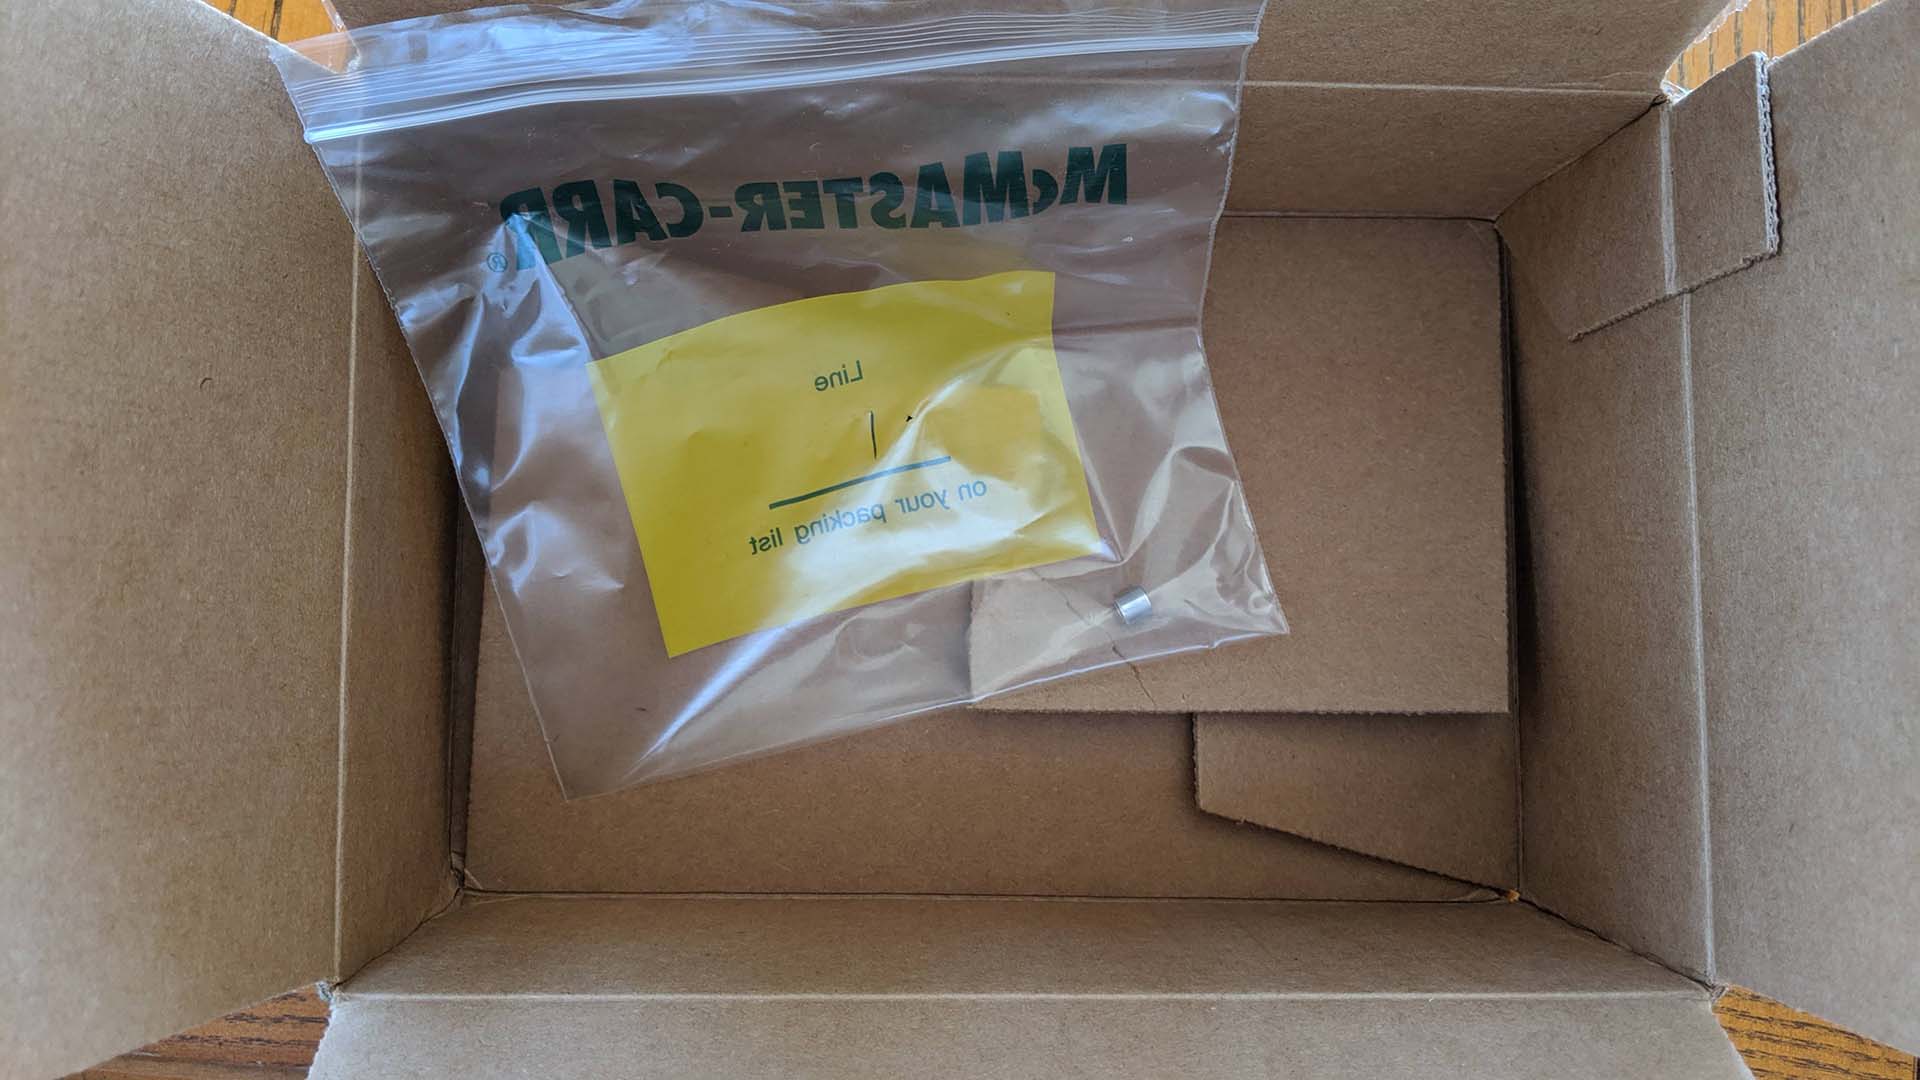 Wasteful McMaster Carr packaging